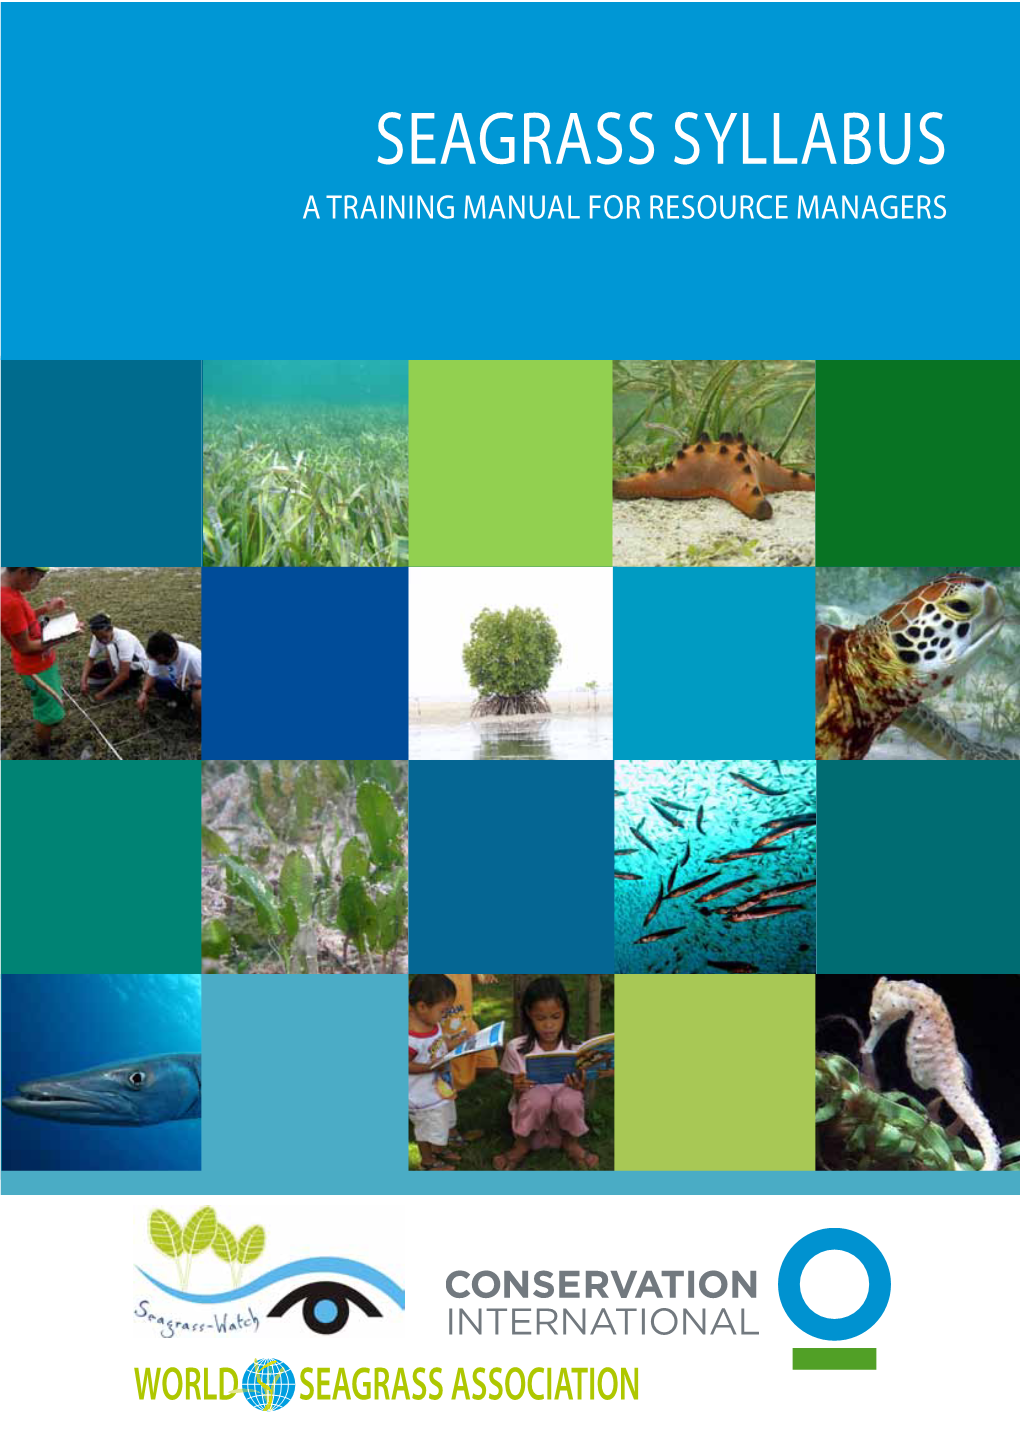 Seagrass Syllabus a Training Manual for Resource Managers